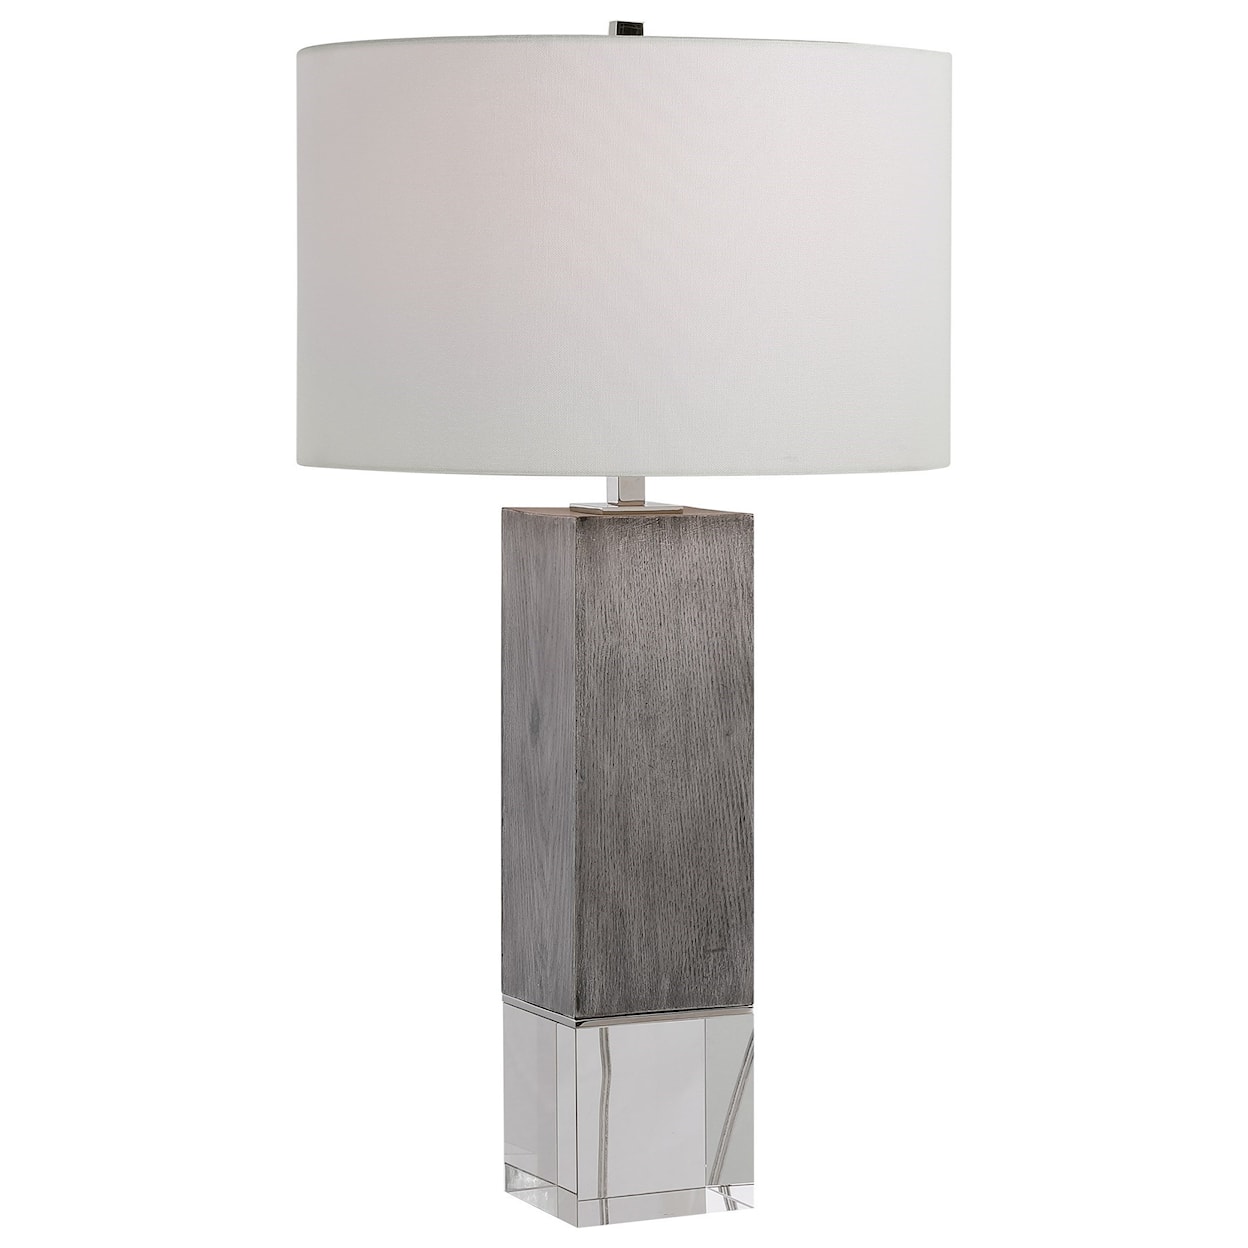 Uttermost Table Lamps Cordata Modern Lodge Table Lamp